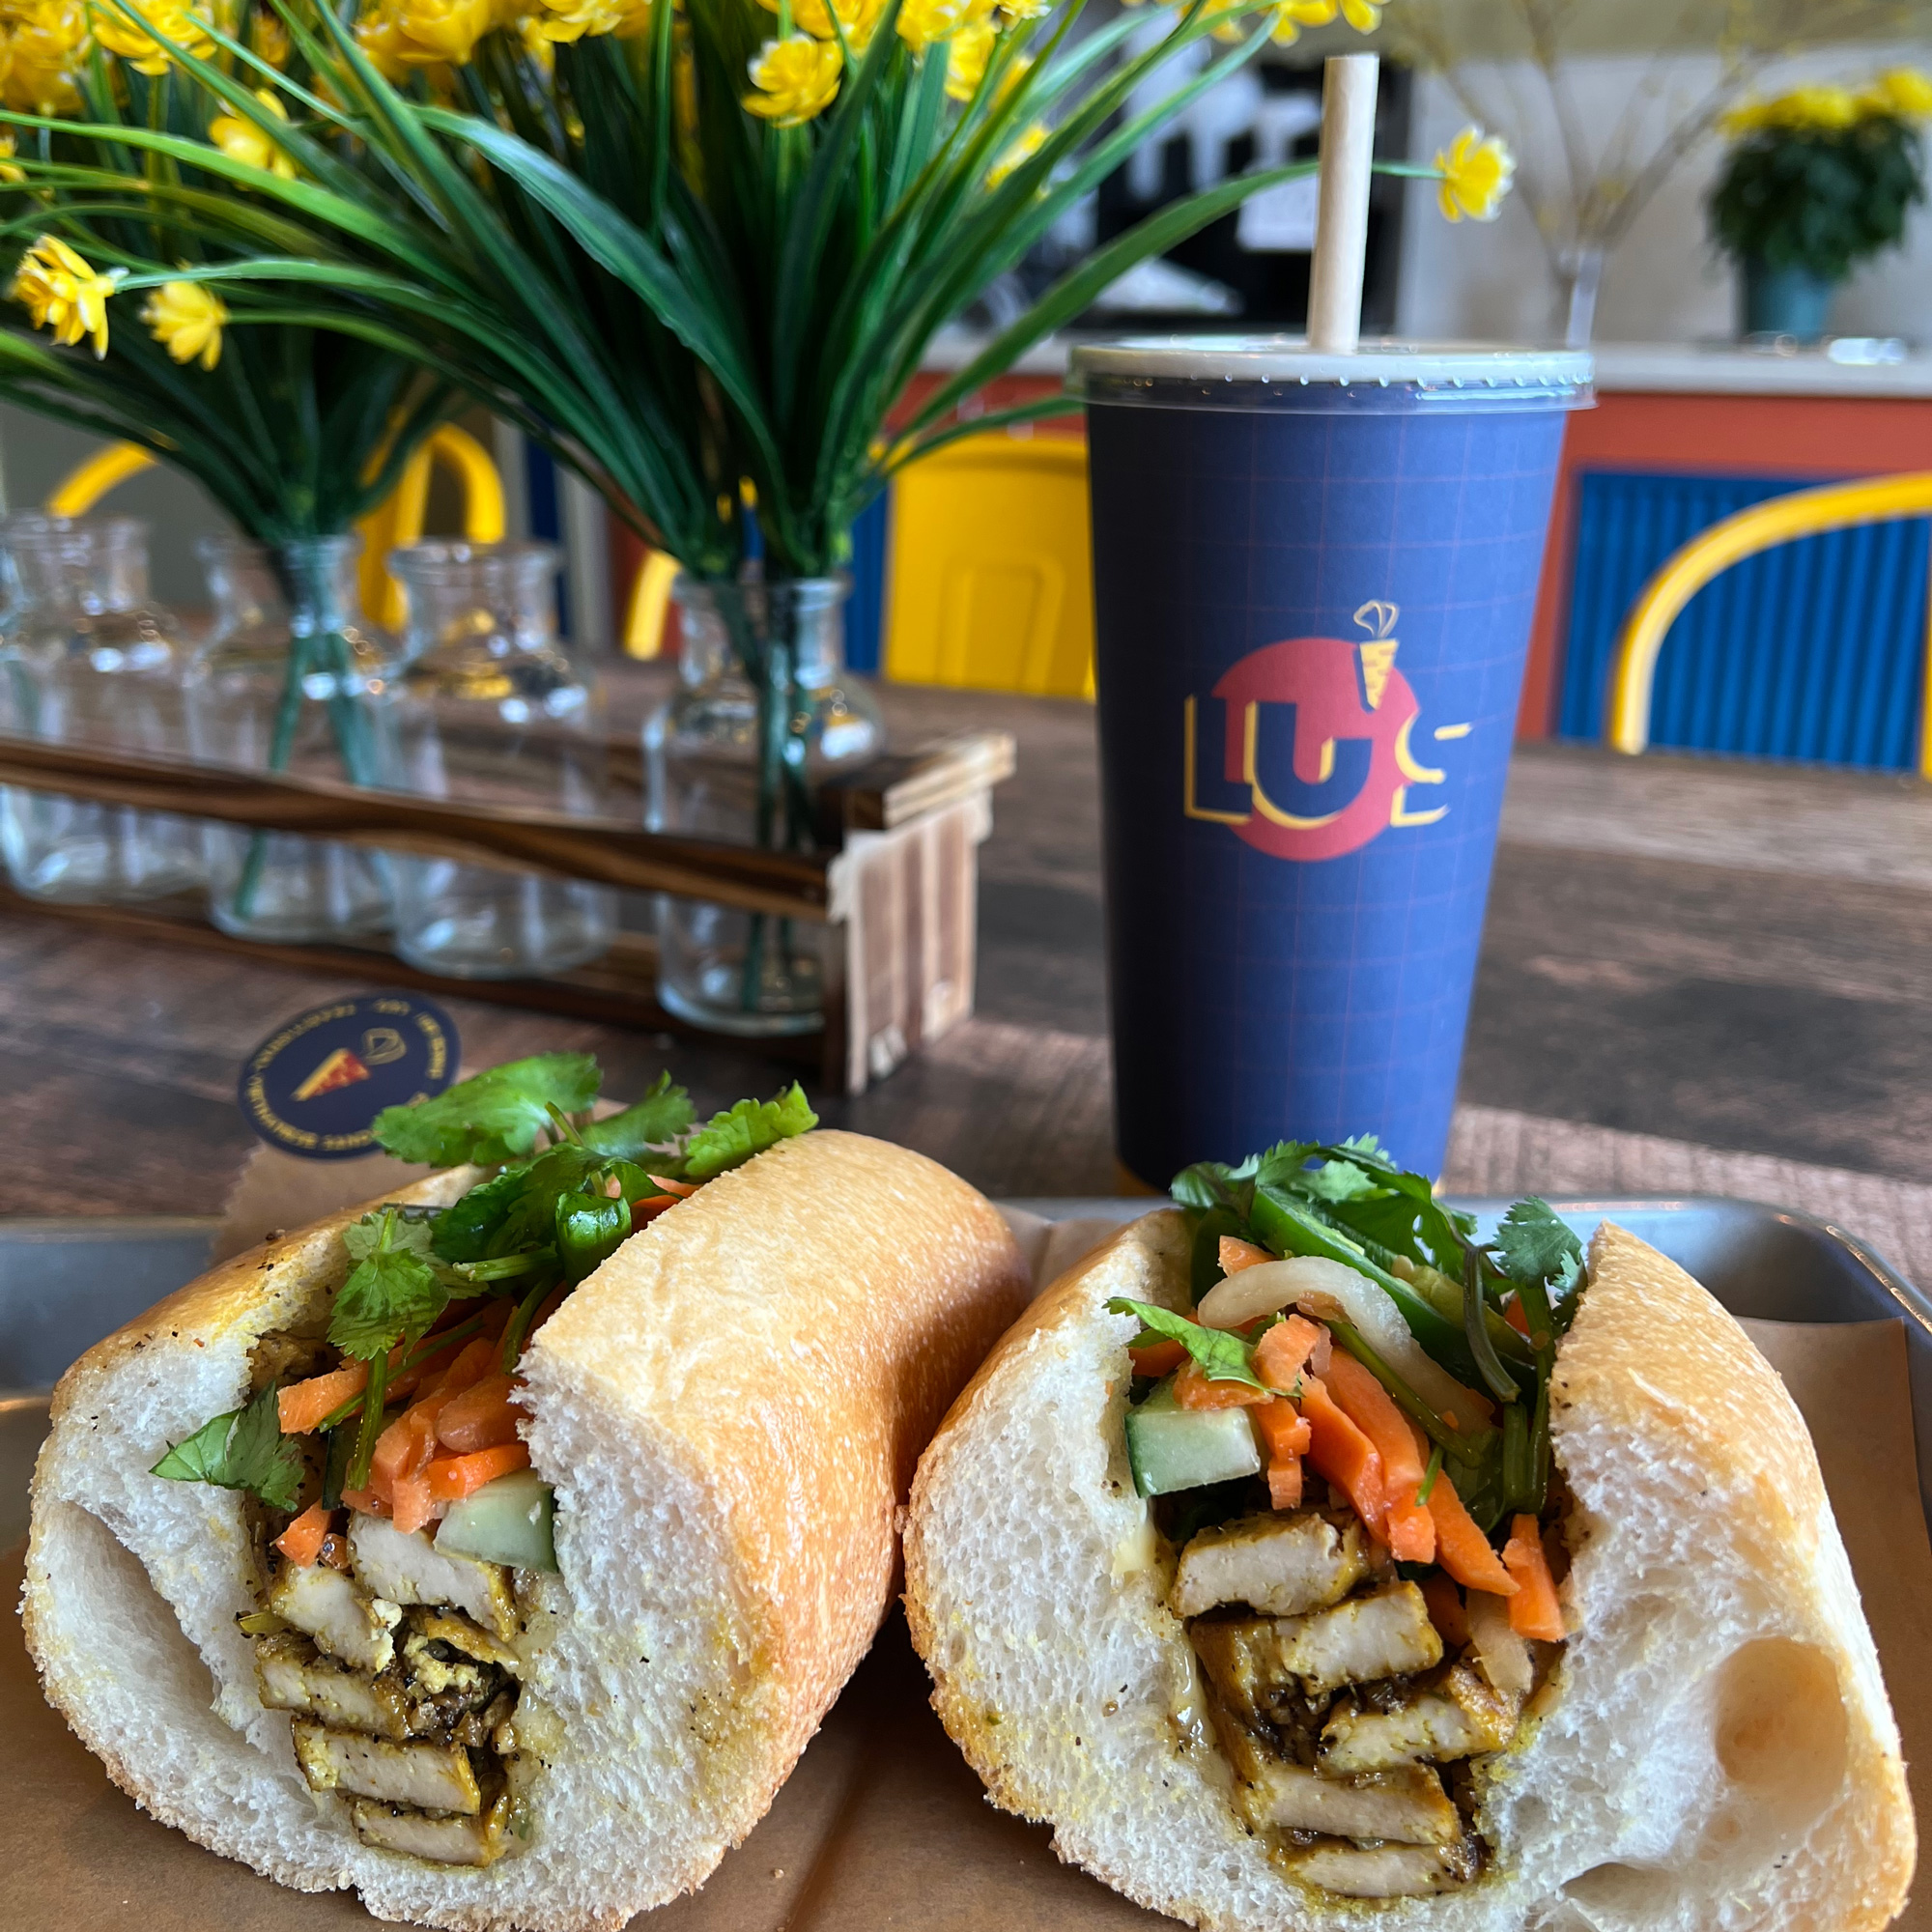 Lu's sandwich with newly rebranded soda cup